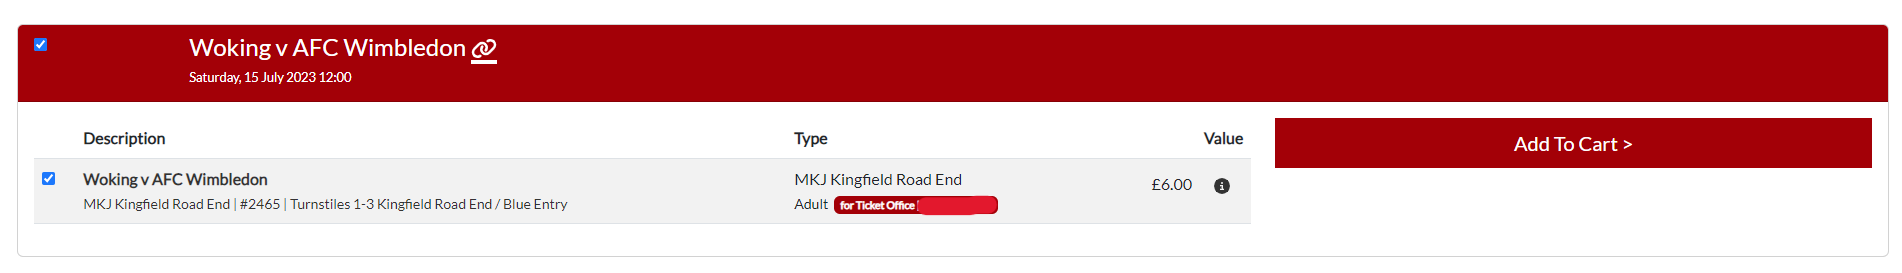 Select the ticket(s) that you would like to purchase and click on the ‘Add to Cart’ button. 